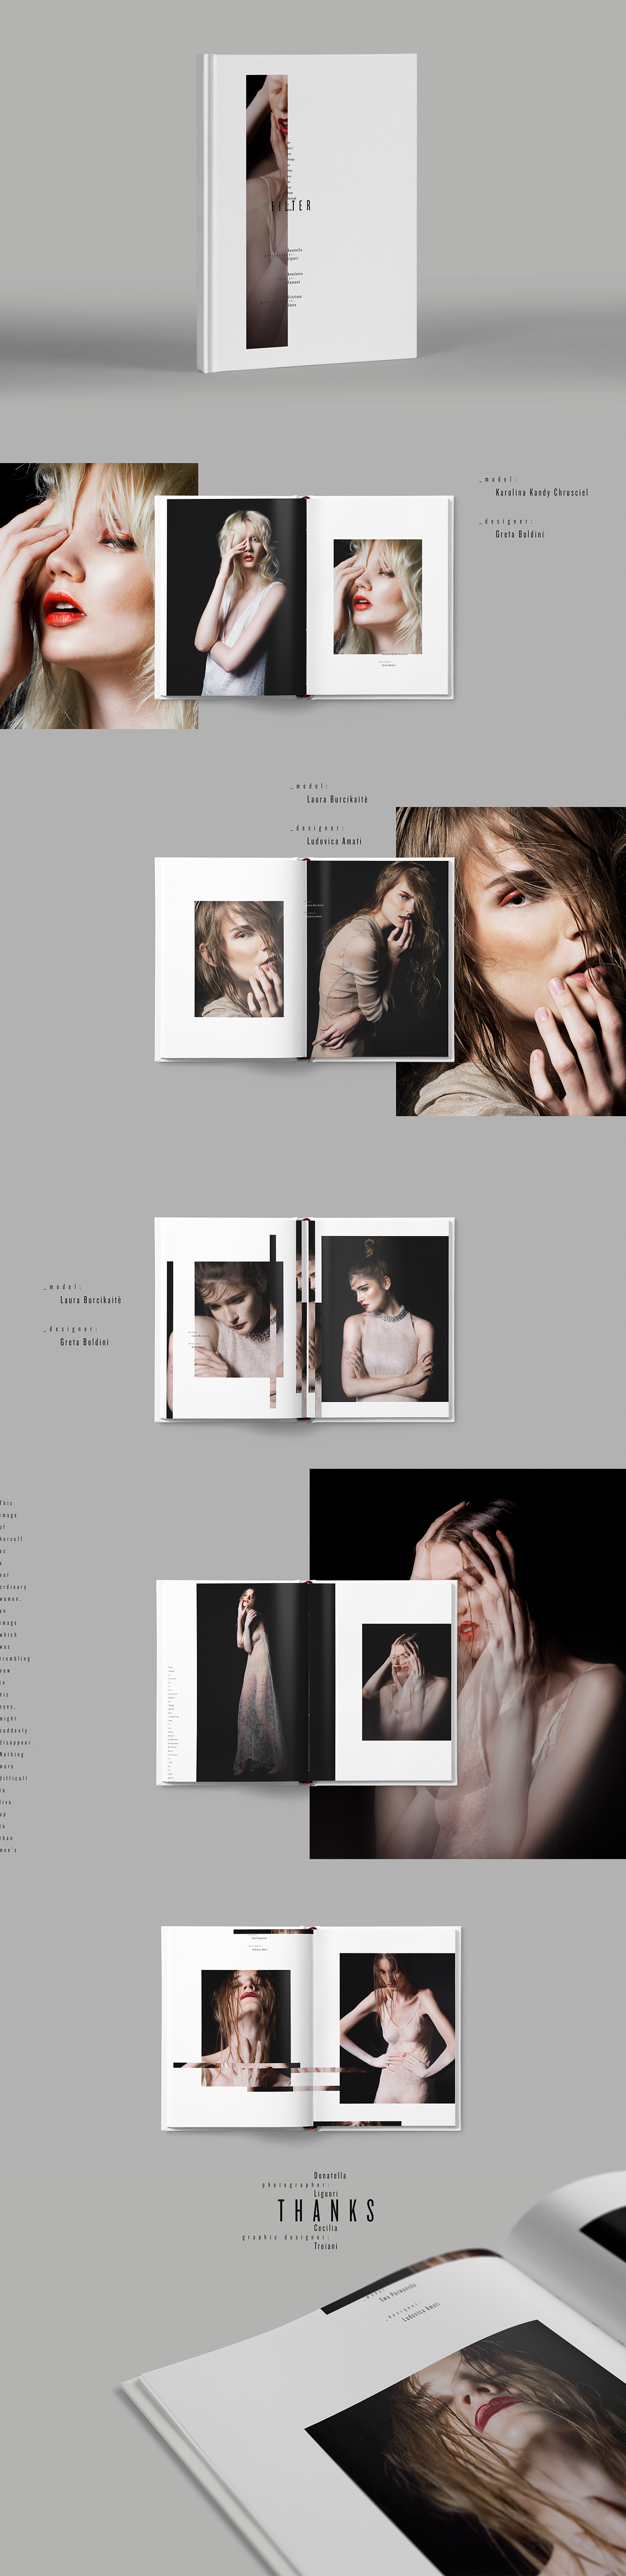 filter editorial Project